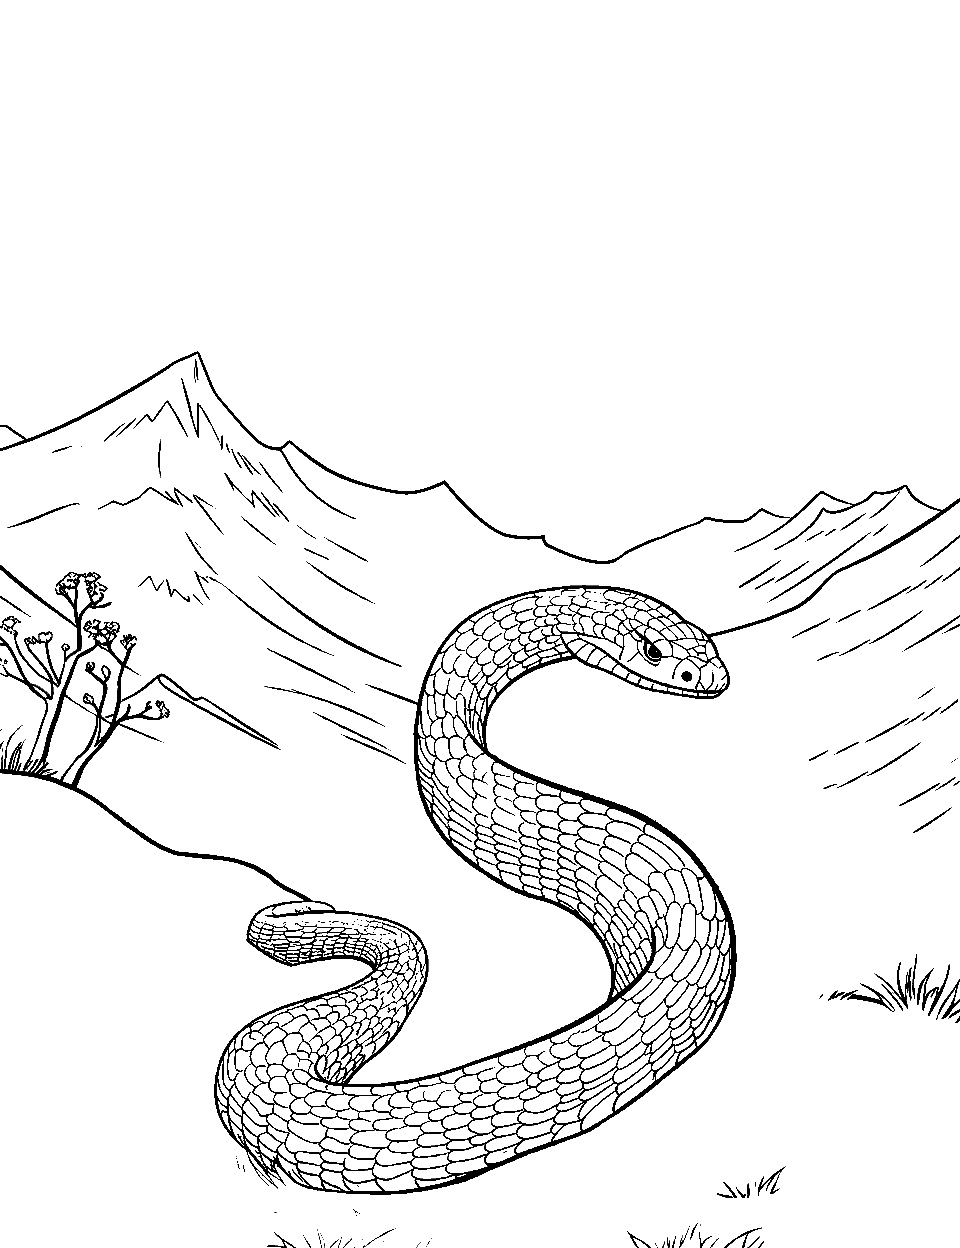 Mountain Serpent Coloring Page - A snake winding its way down a rocky mountain path.